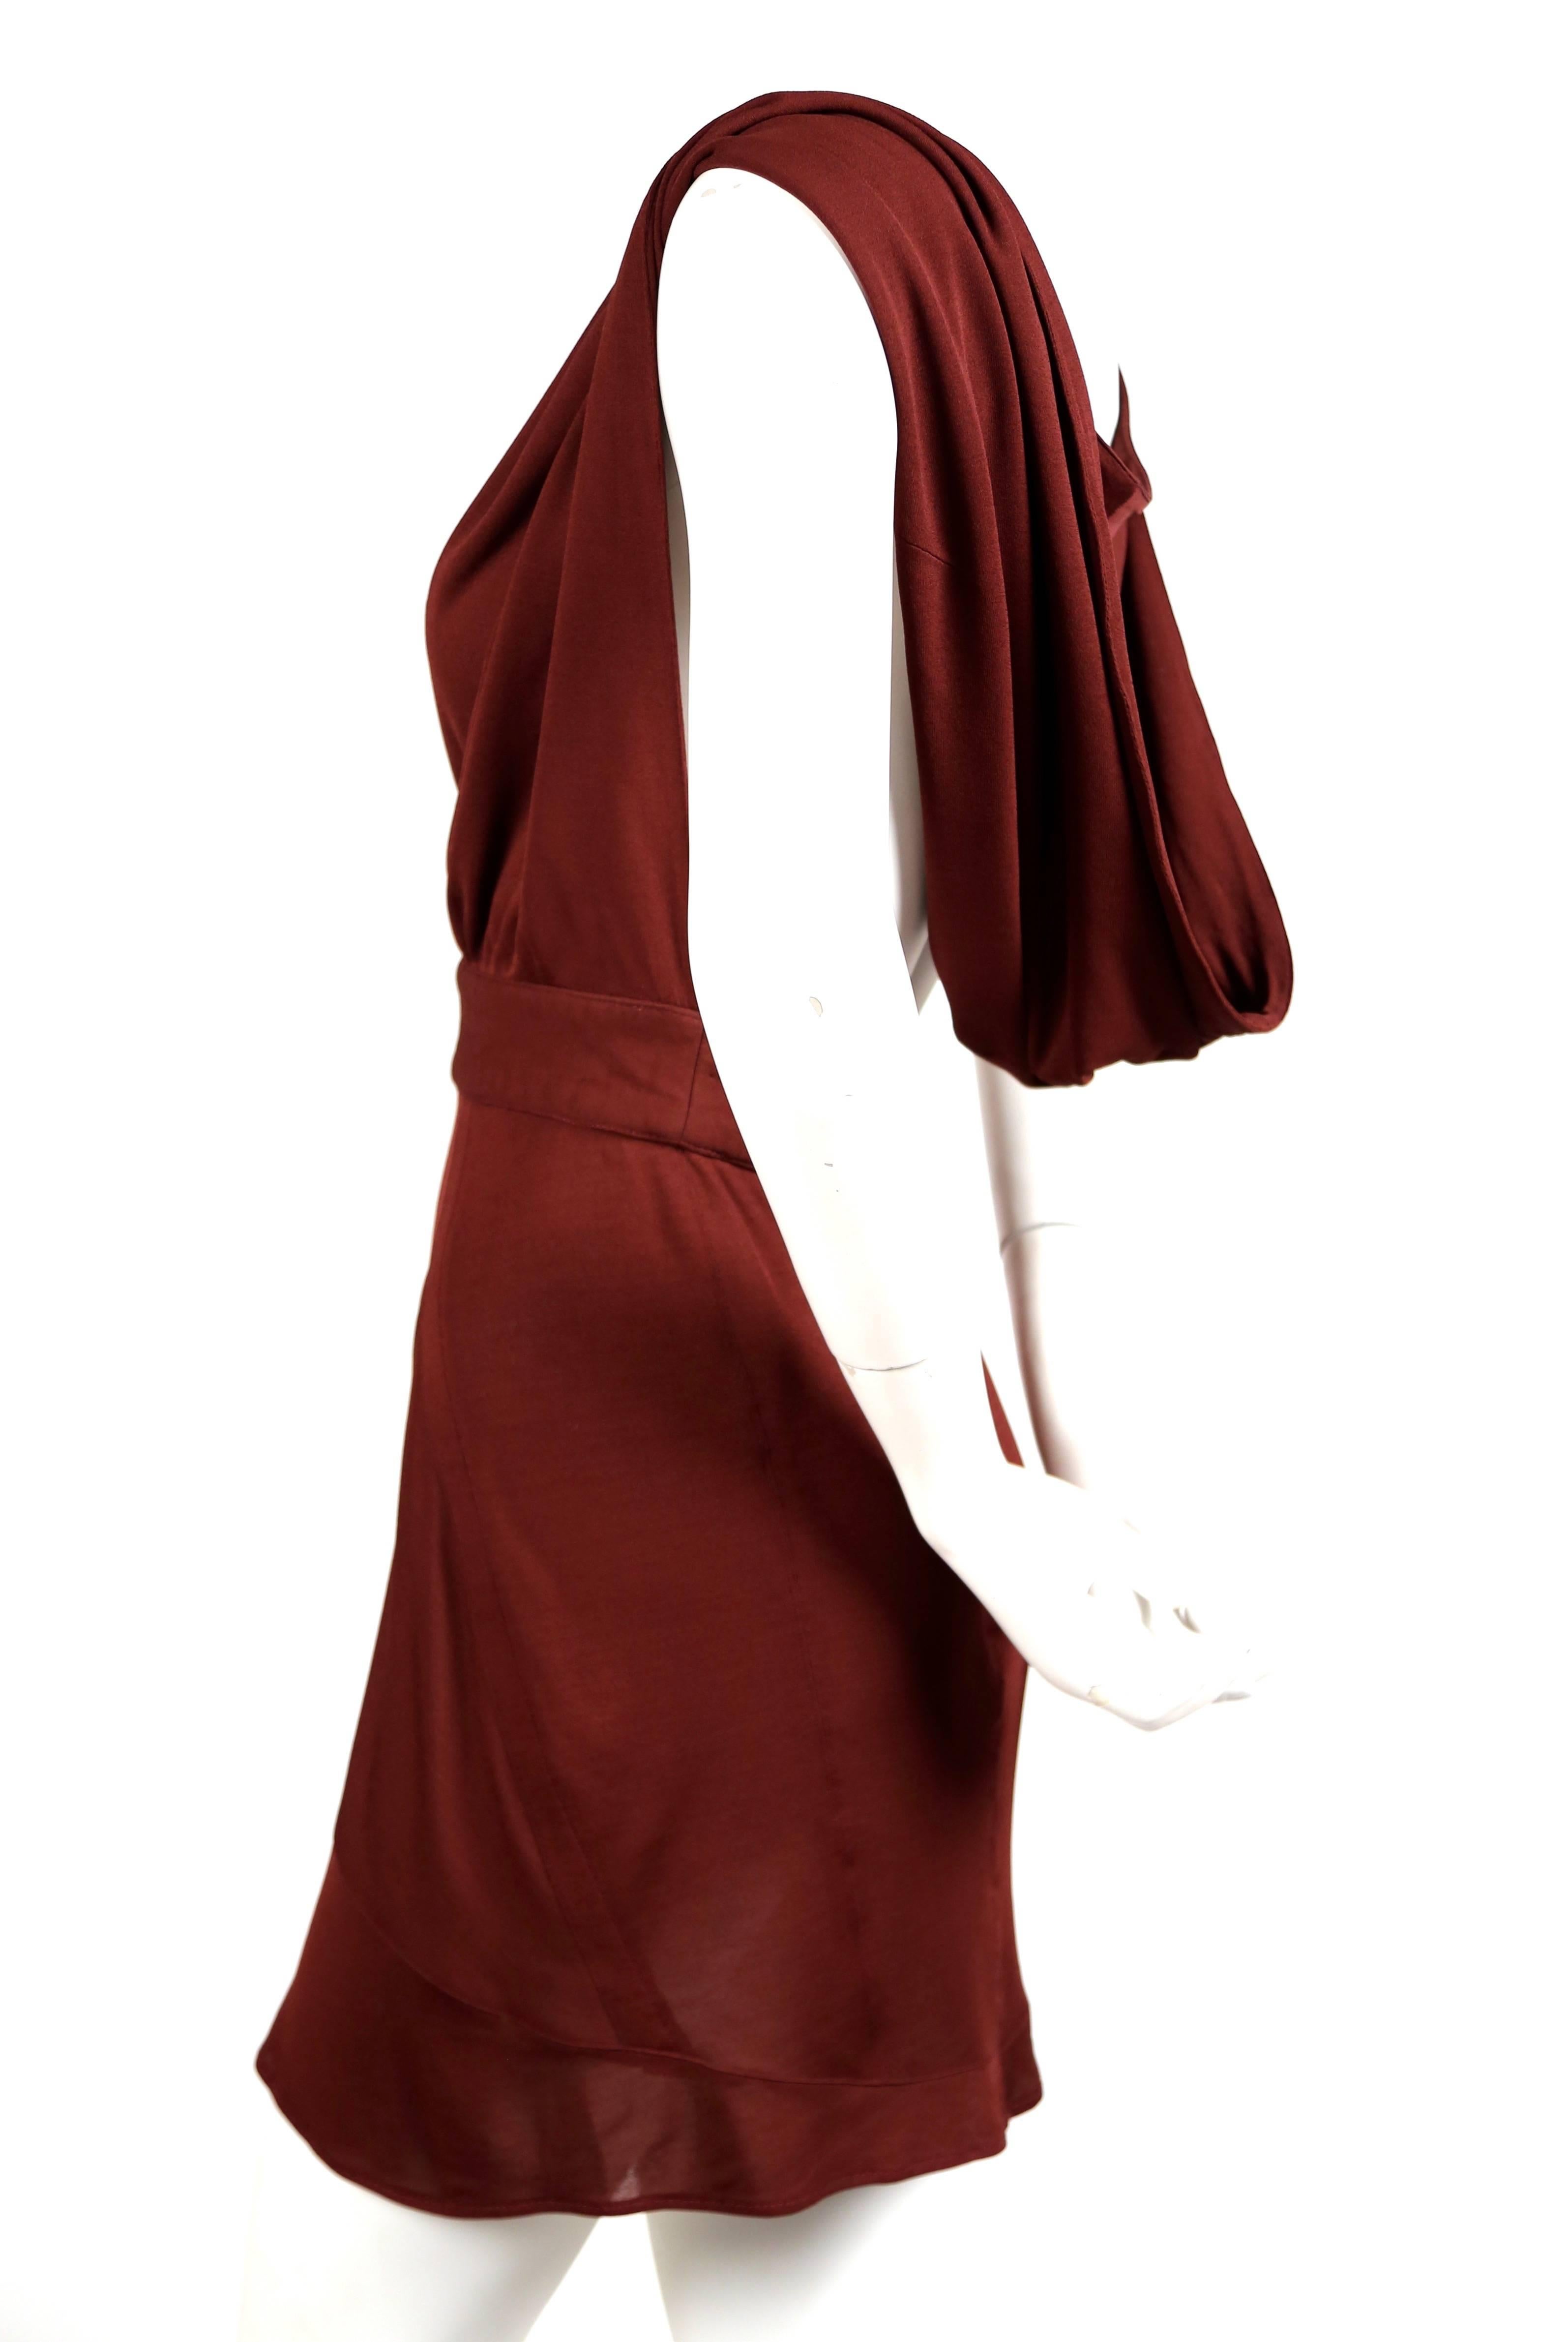 Very rare backless burgundy jersey dress with hood from Azzedine Alaia dating to 1990. No size label however this would best fit a modern U.S. 4. Approximate measurements: waist 26